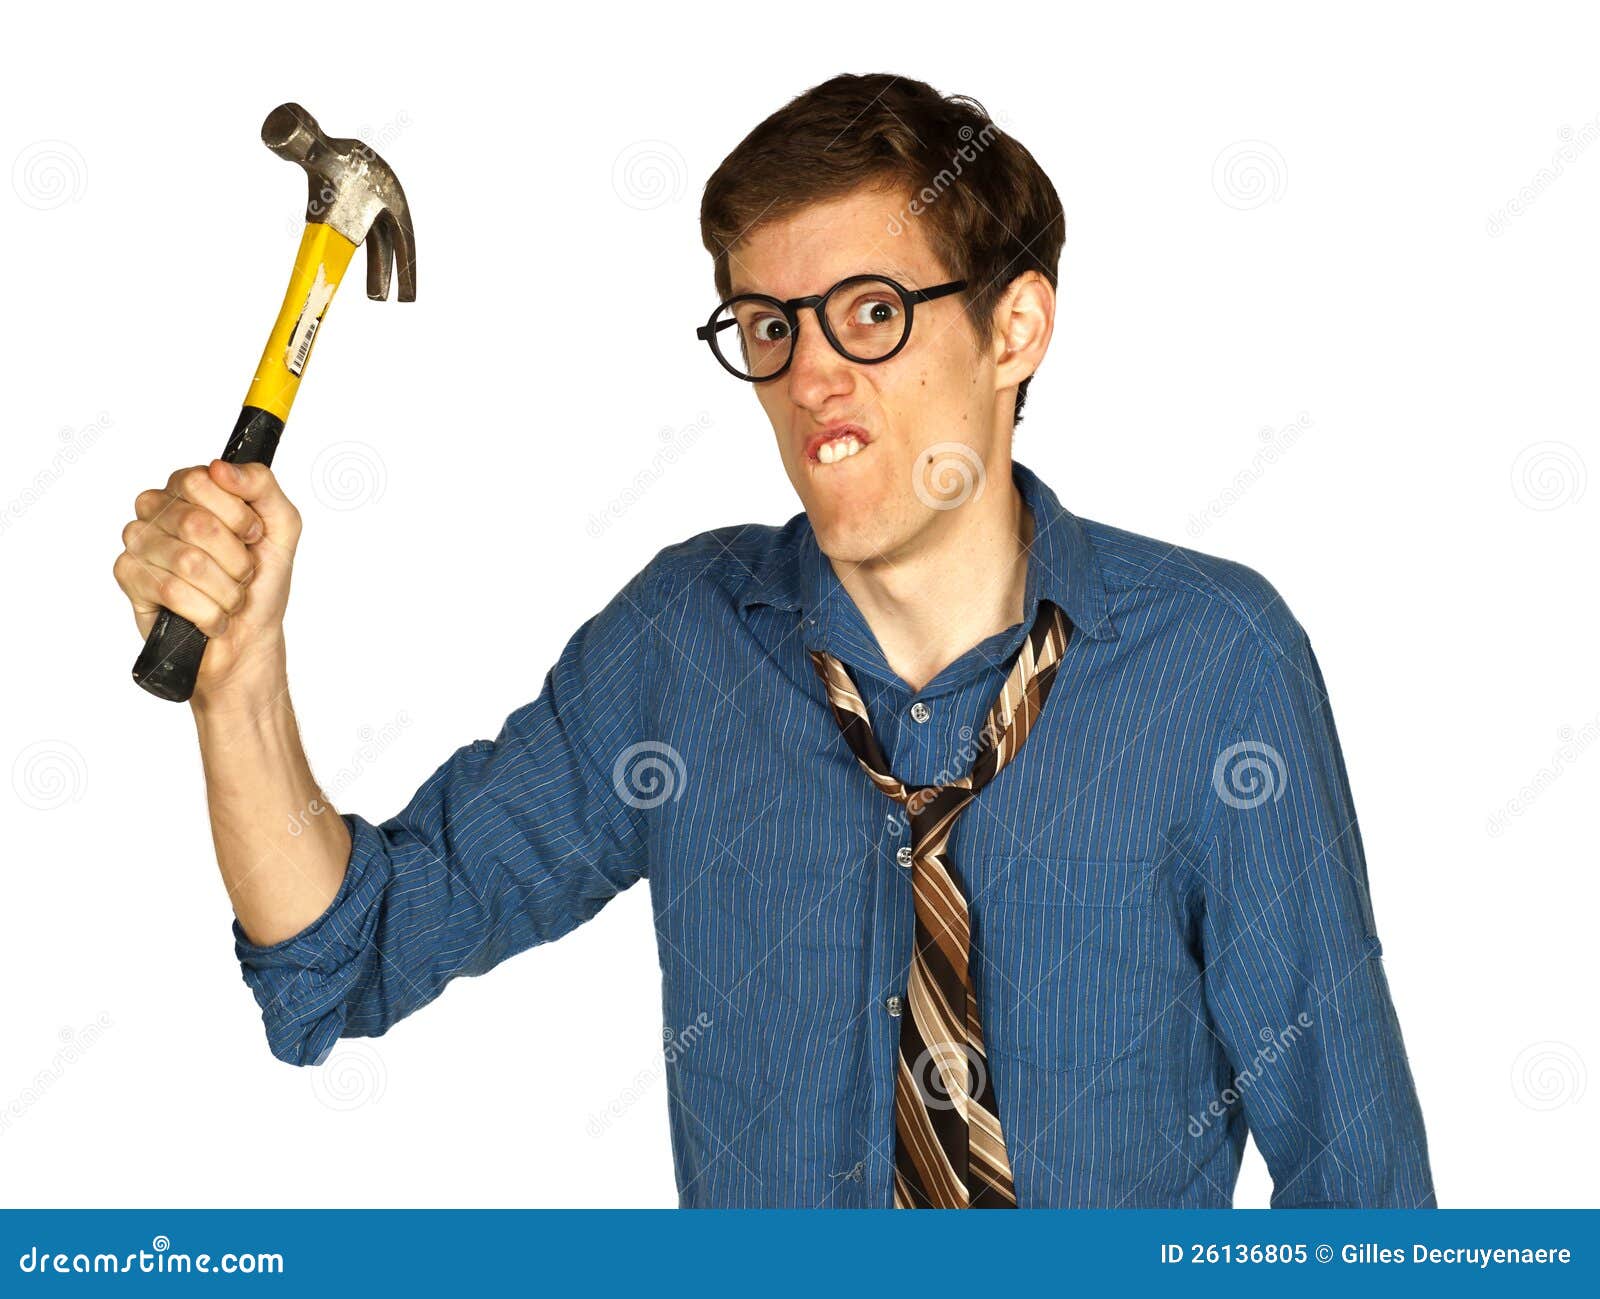 clipart man with hammer - photo #47